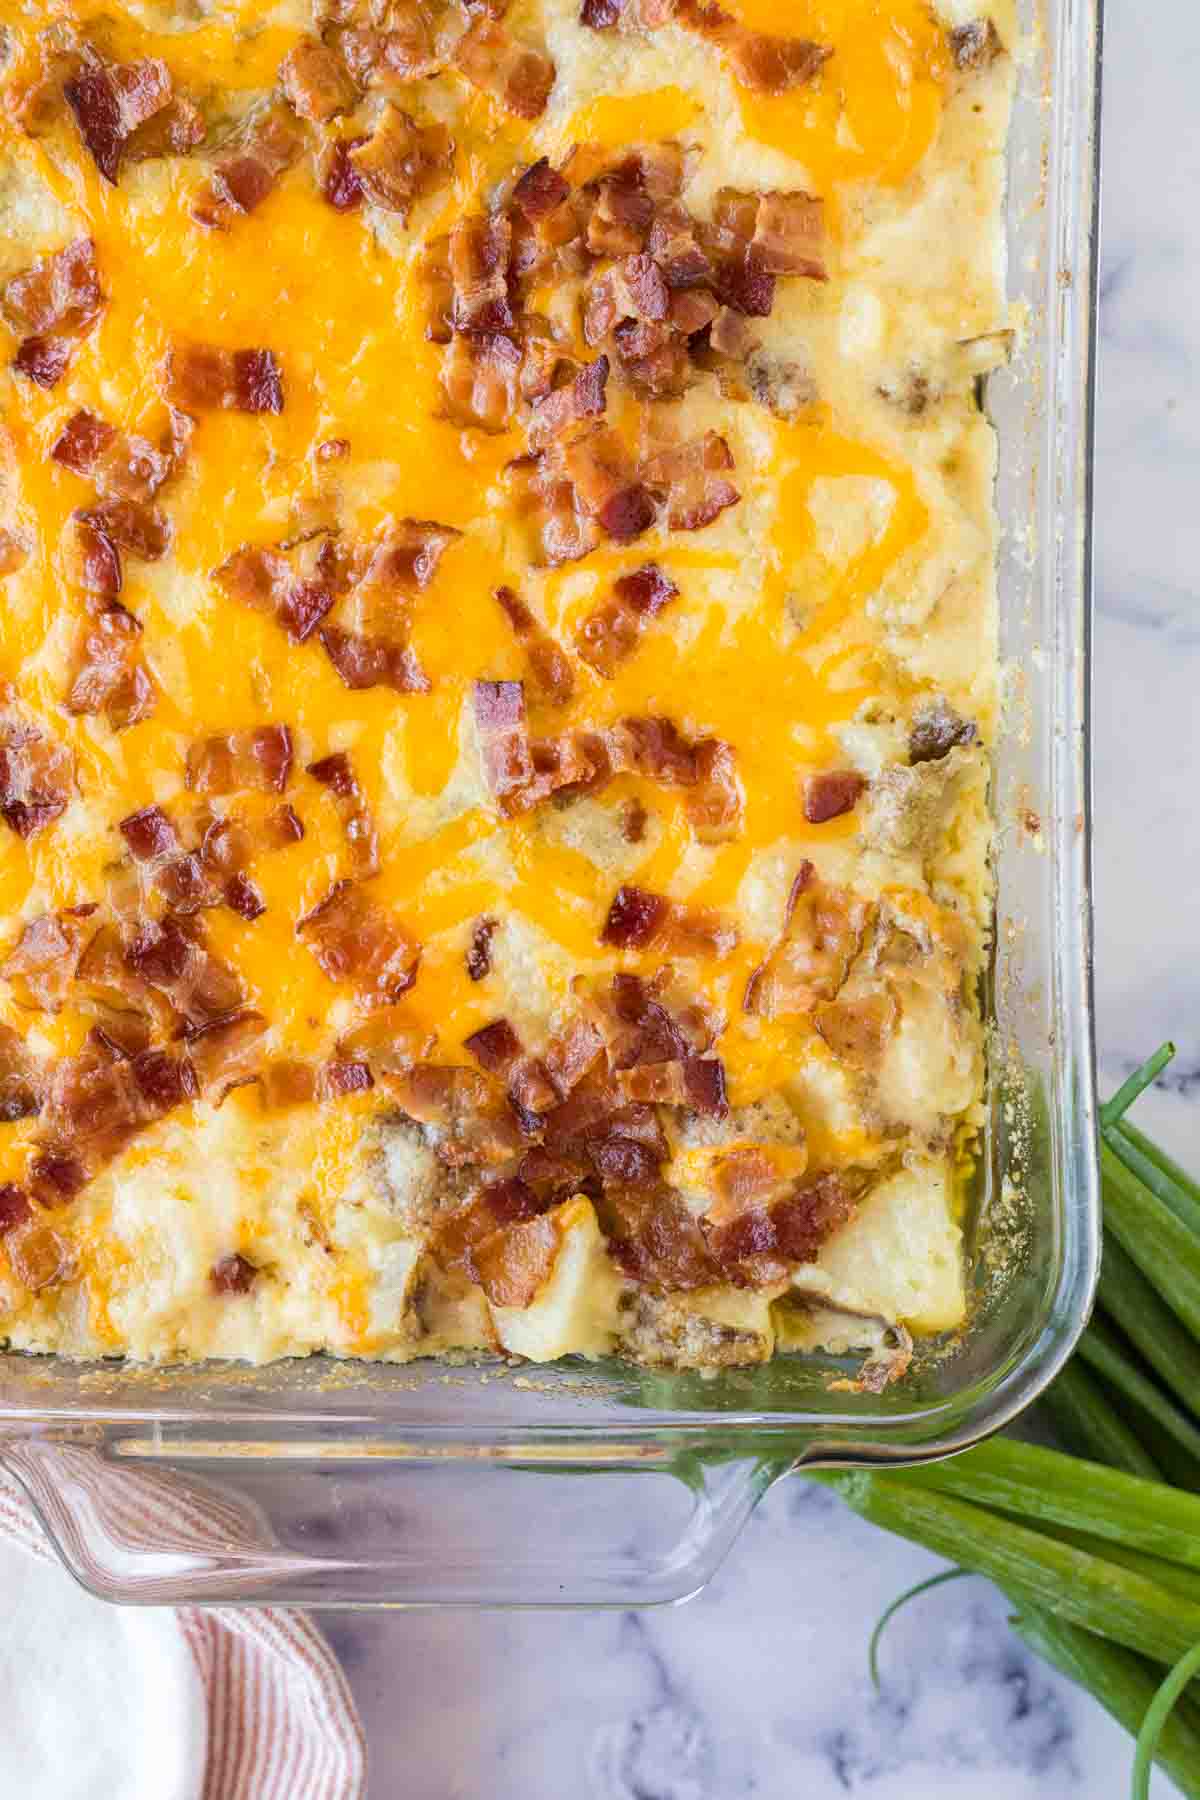 Twice Baked Potato Casserole — Bless this Mess